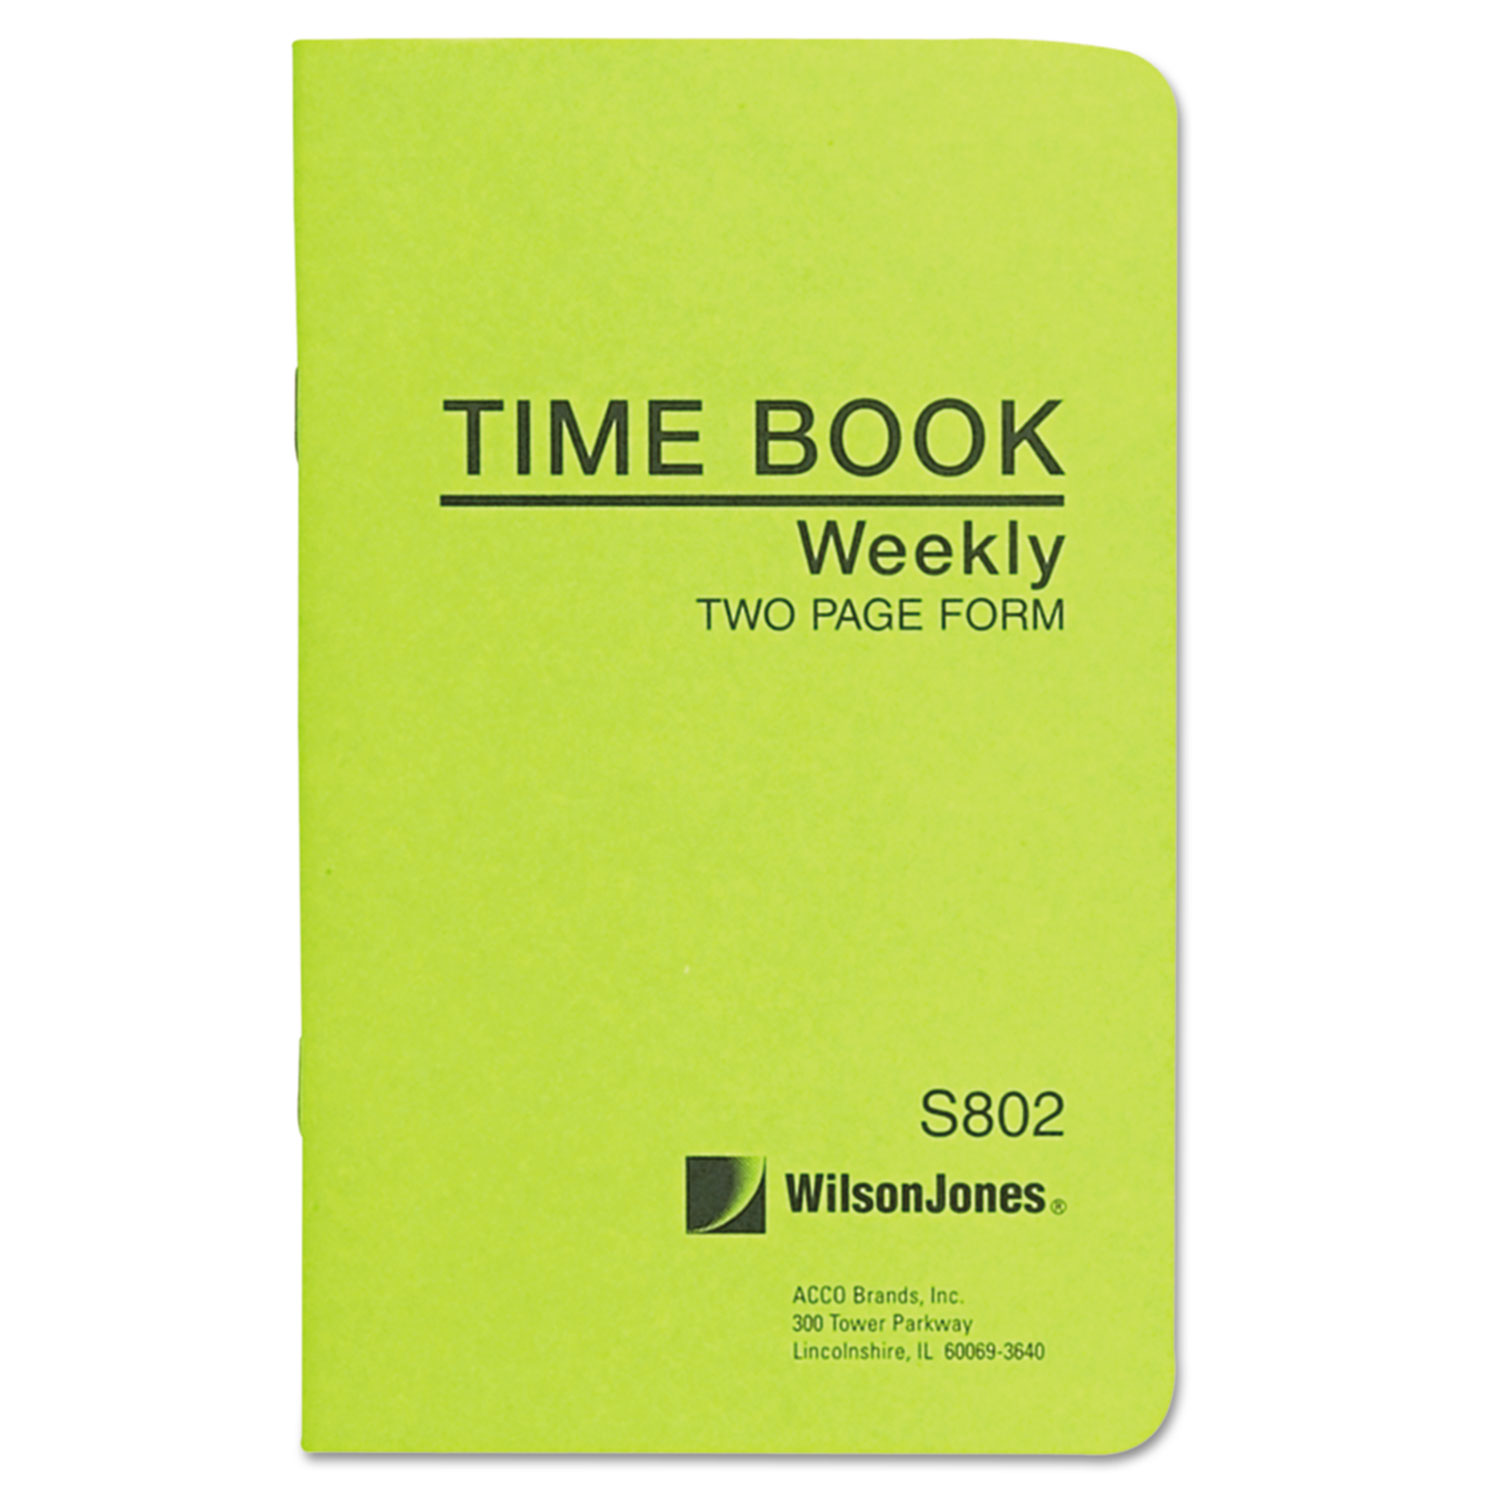  Wilson Jones WS802A Foreman's Time Book, Week Ending, 4-1/8 x 6-3/4, 36-Page Book (WLJS802) 